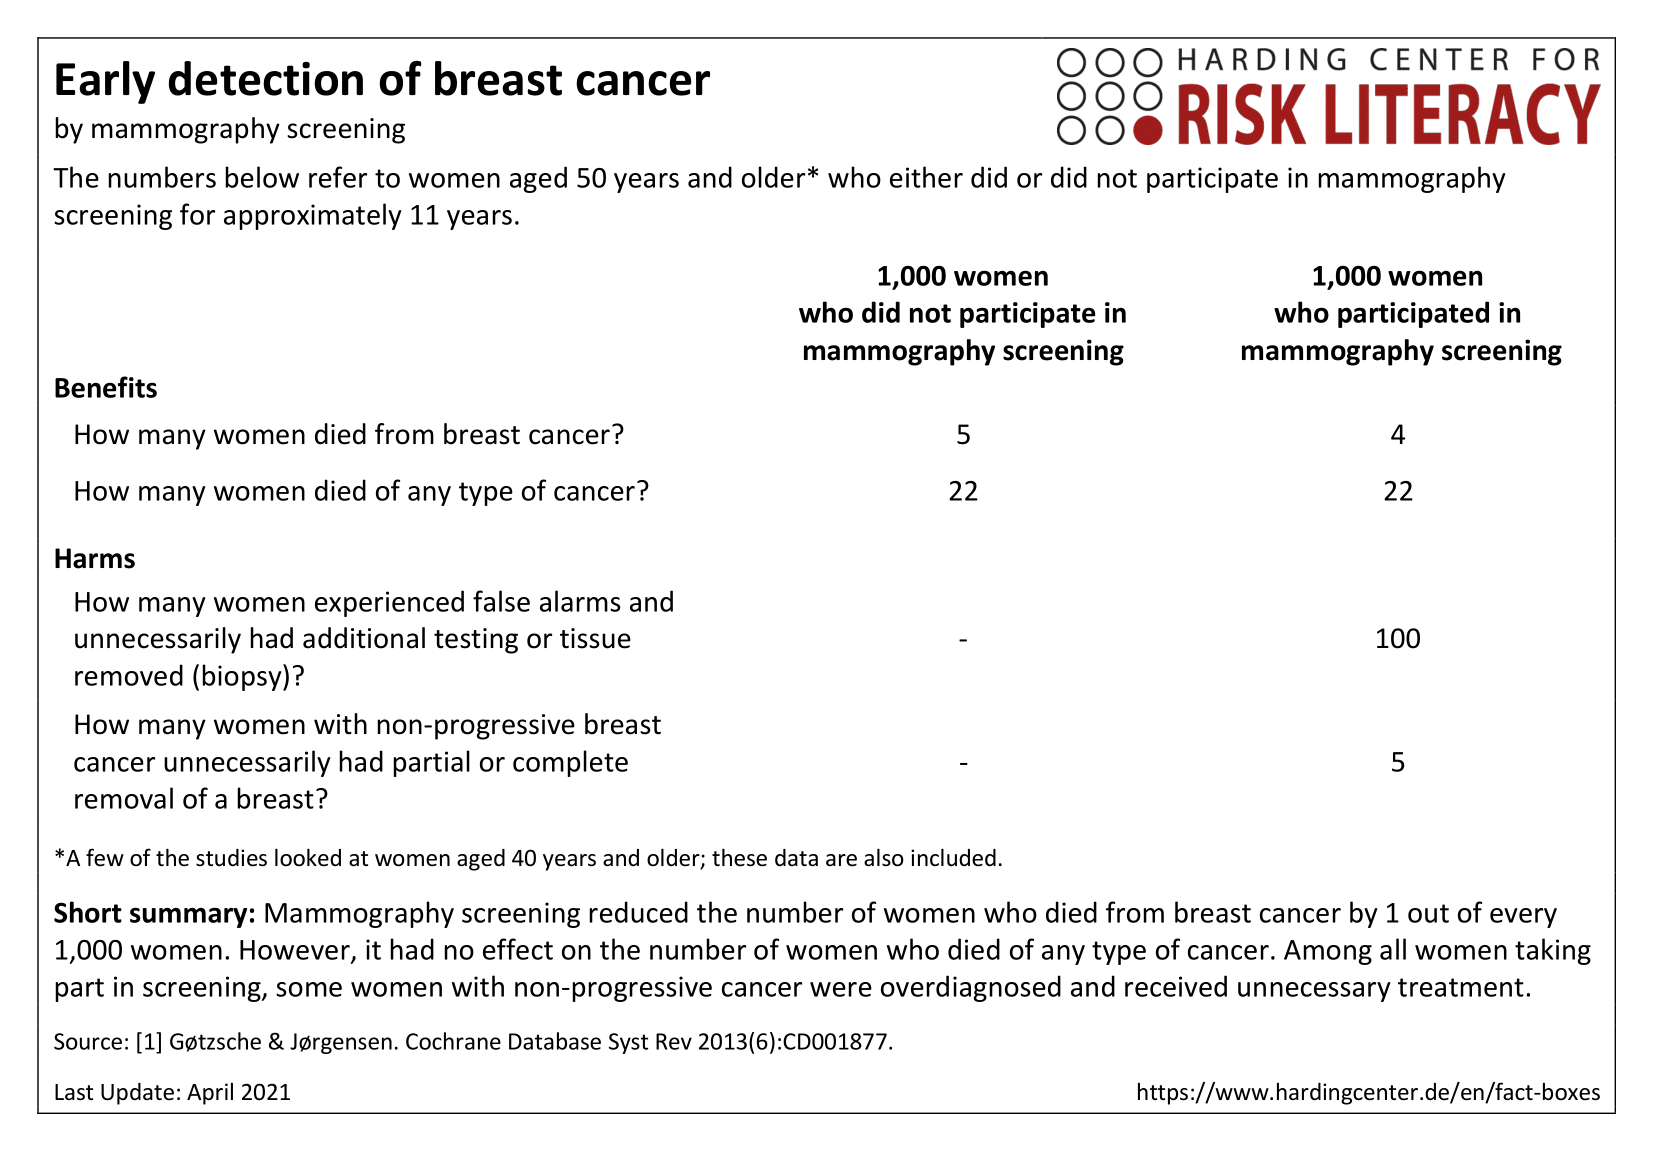 Fact box early detection of breast cancer by mammography screening